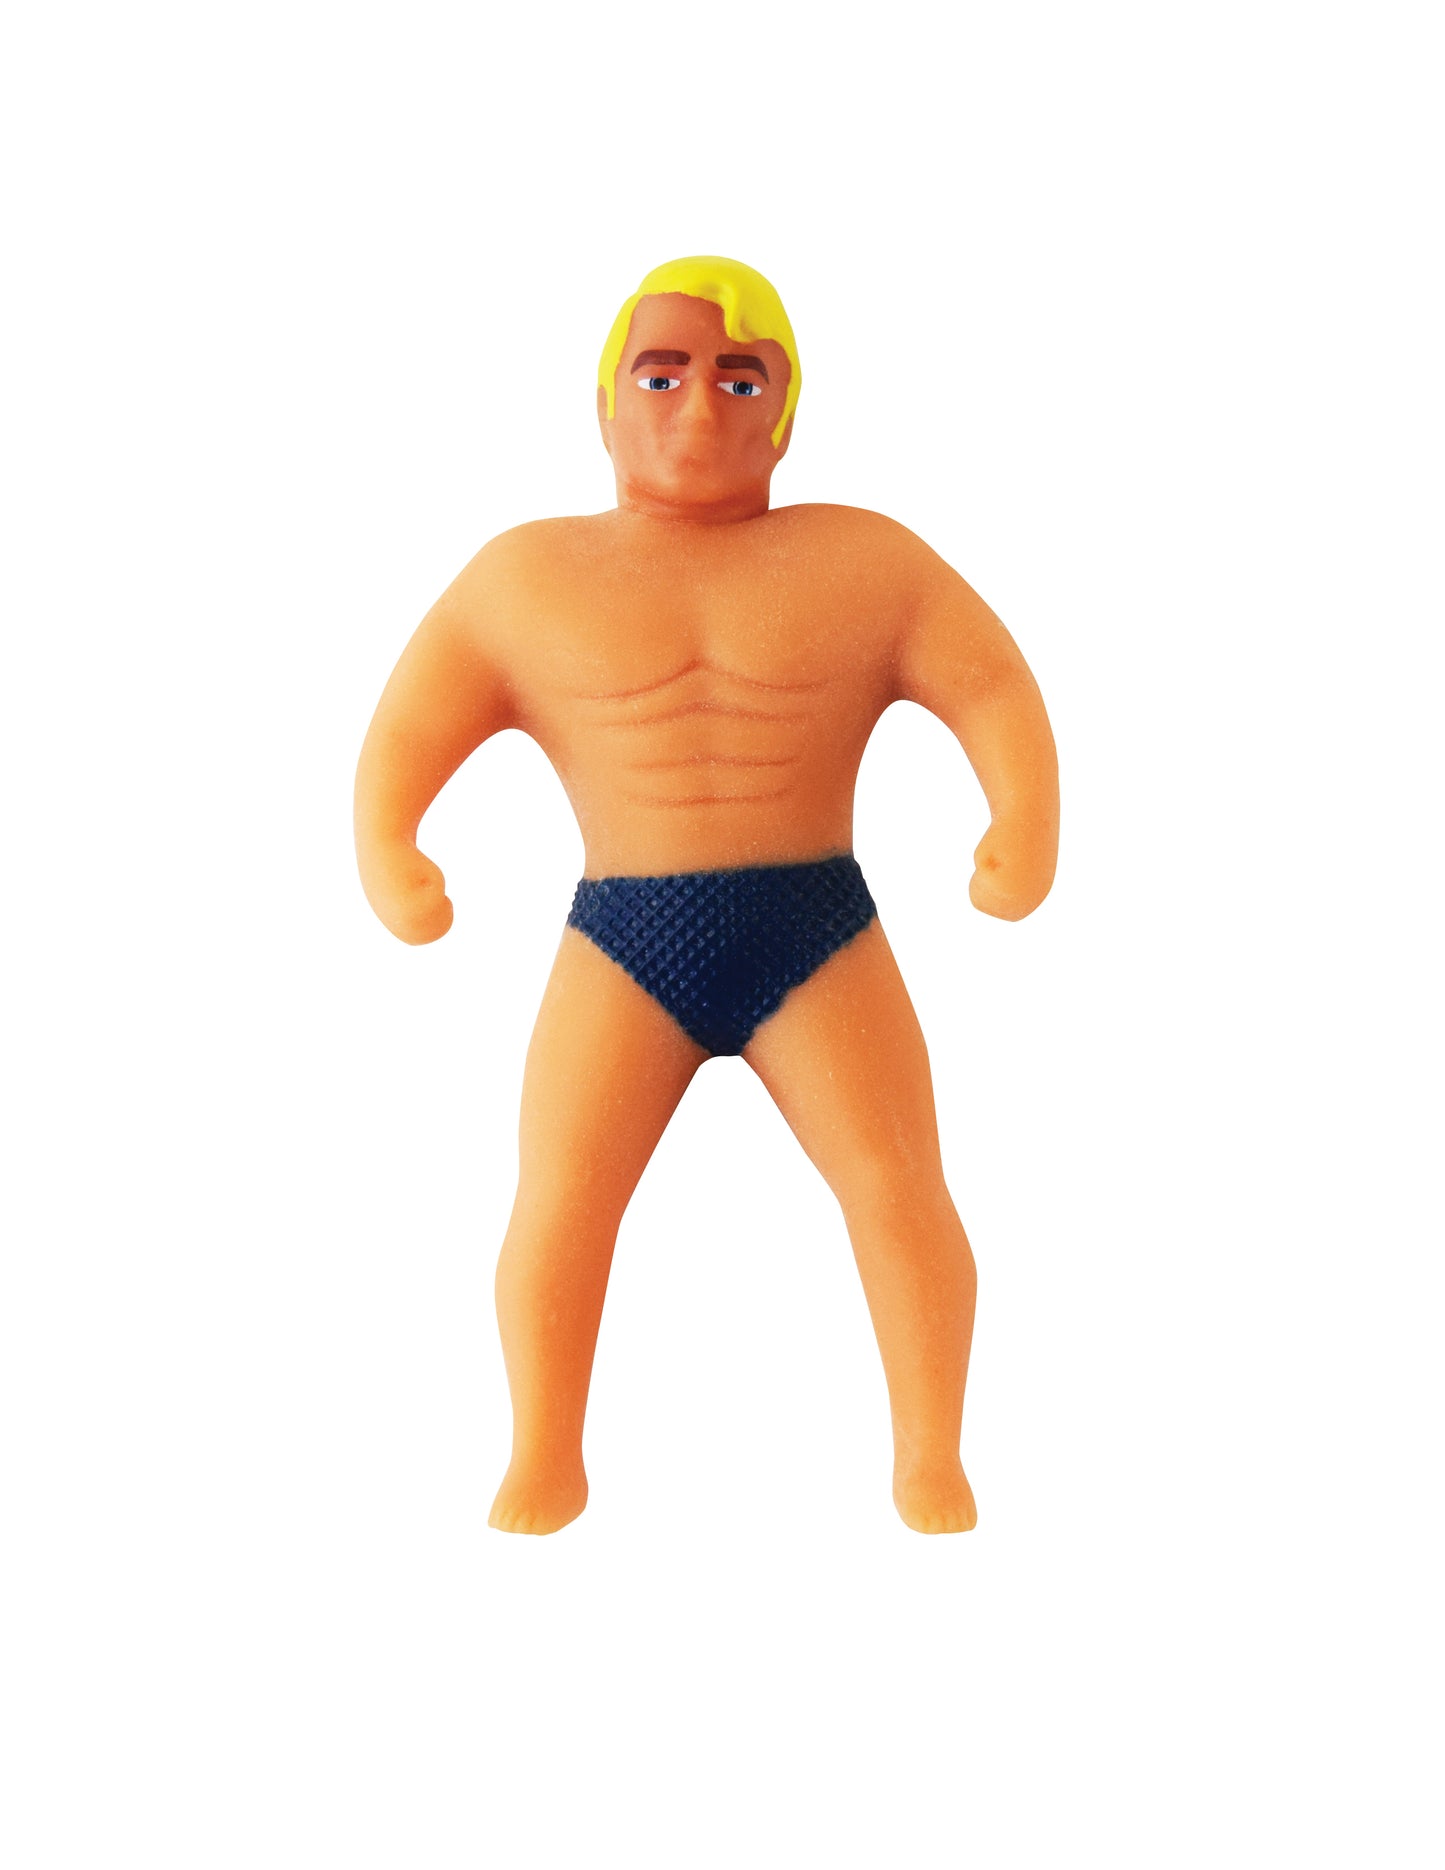 stretch armstrong front